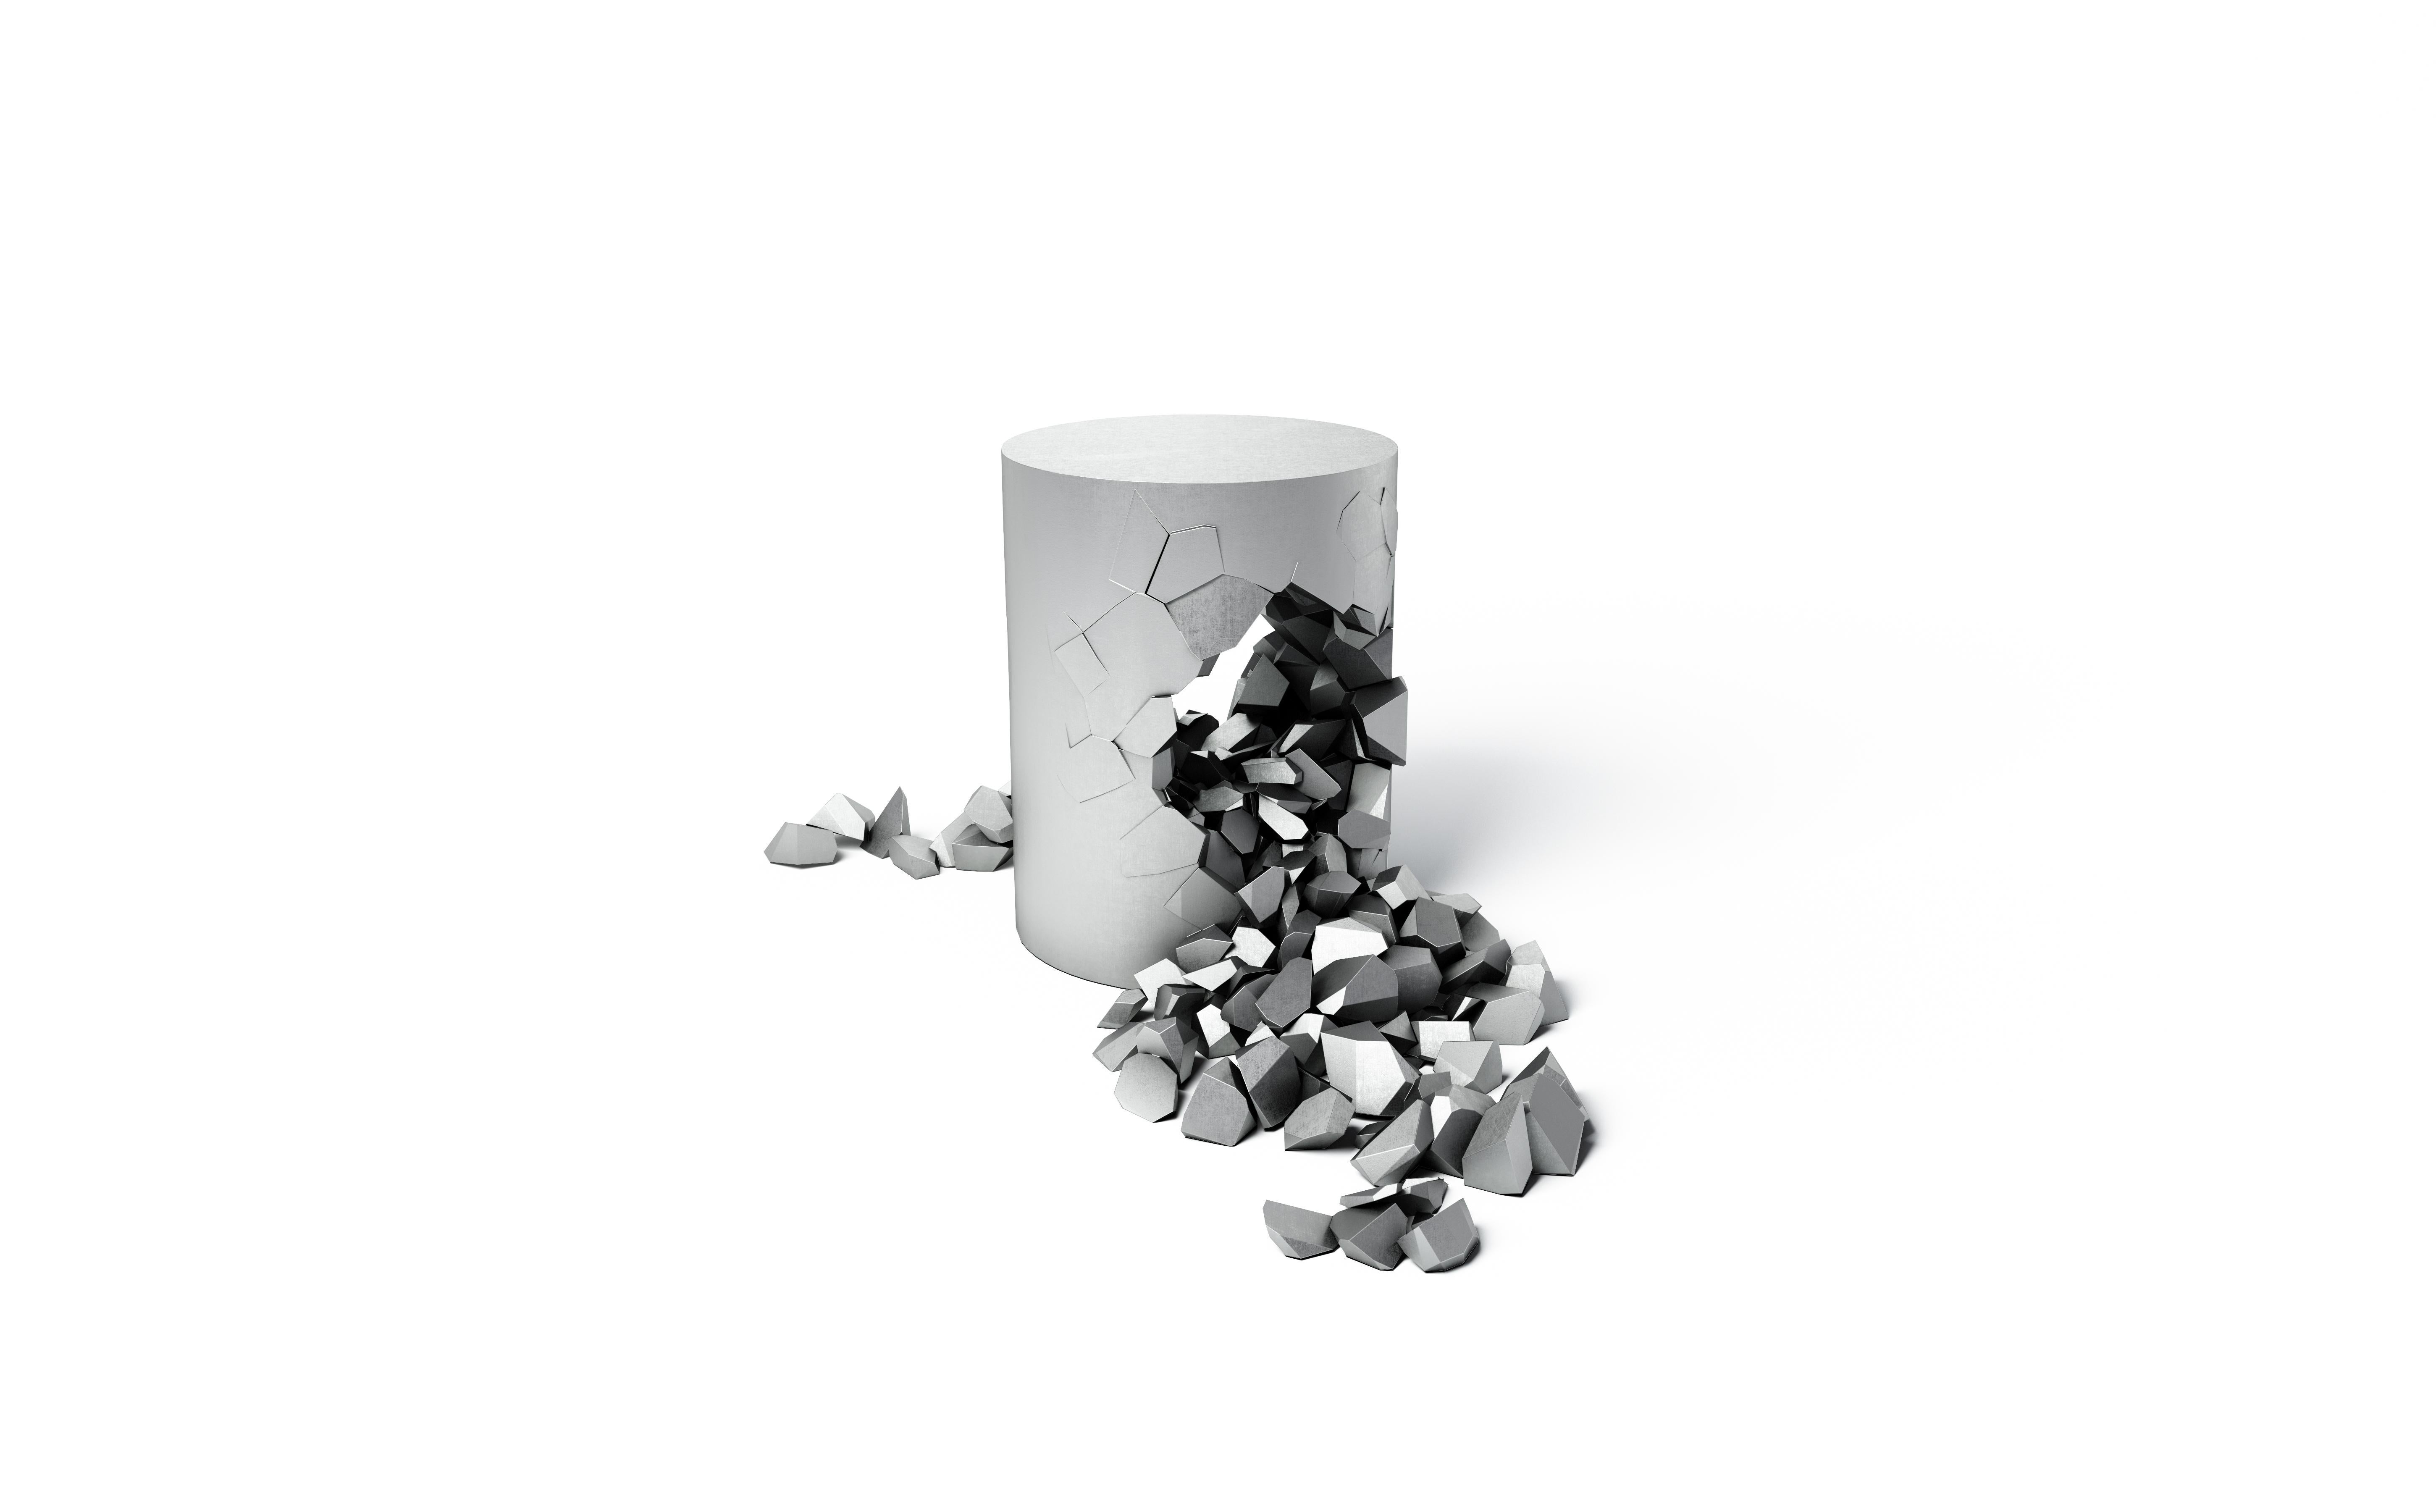 A study in pure minimalism, Bullet Pouf is a perfect cylinder created in high gloss precious metal. Change your viewpoint to reveal an unexpected beauty within. Bullet Pouf is a fully functional piece measuring 45cm in height. Available in flawless